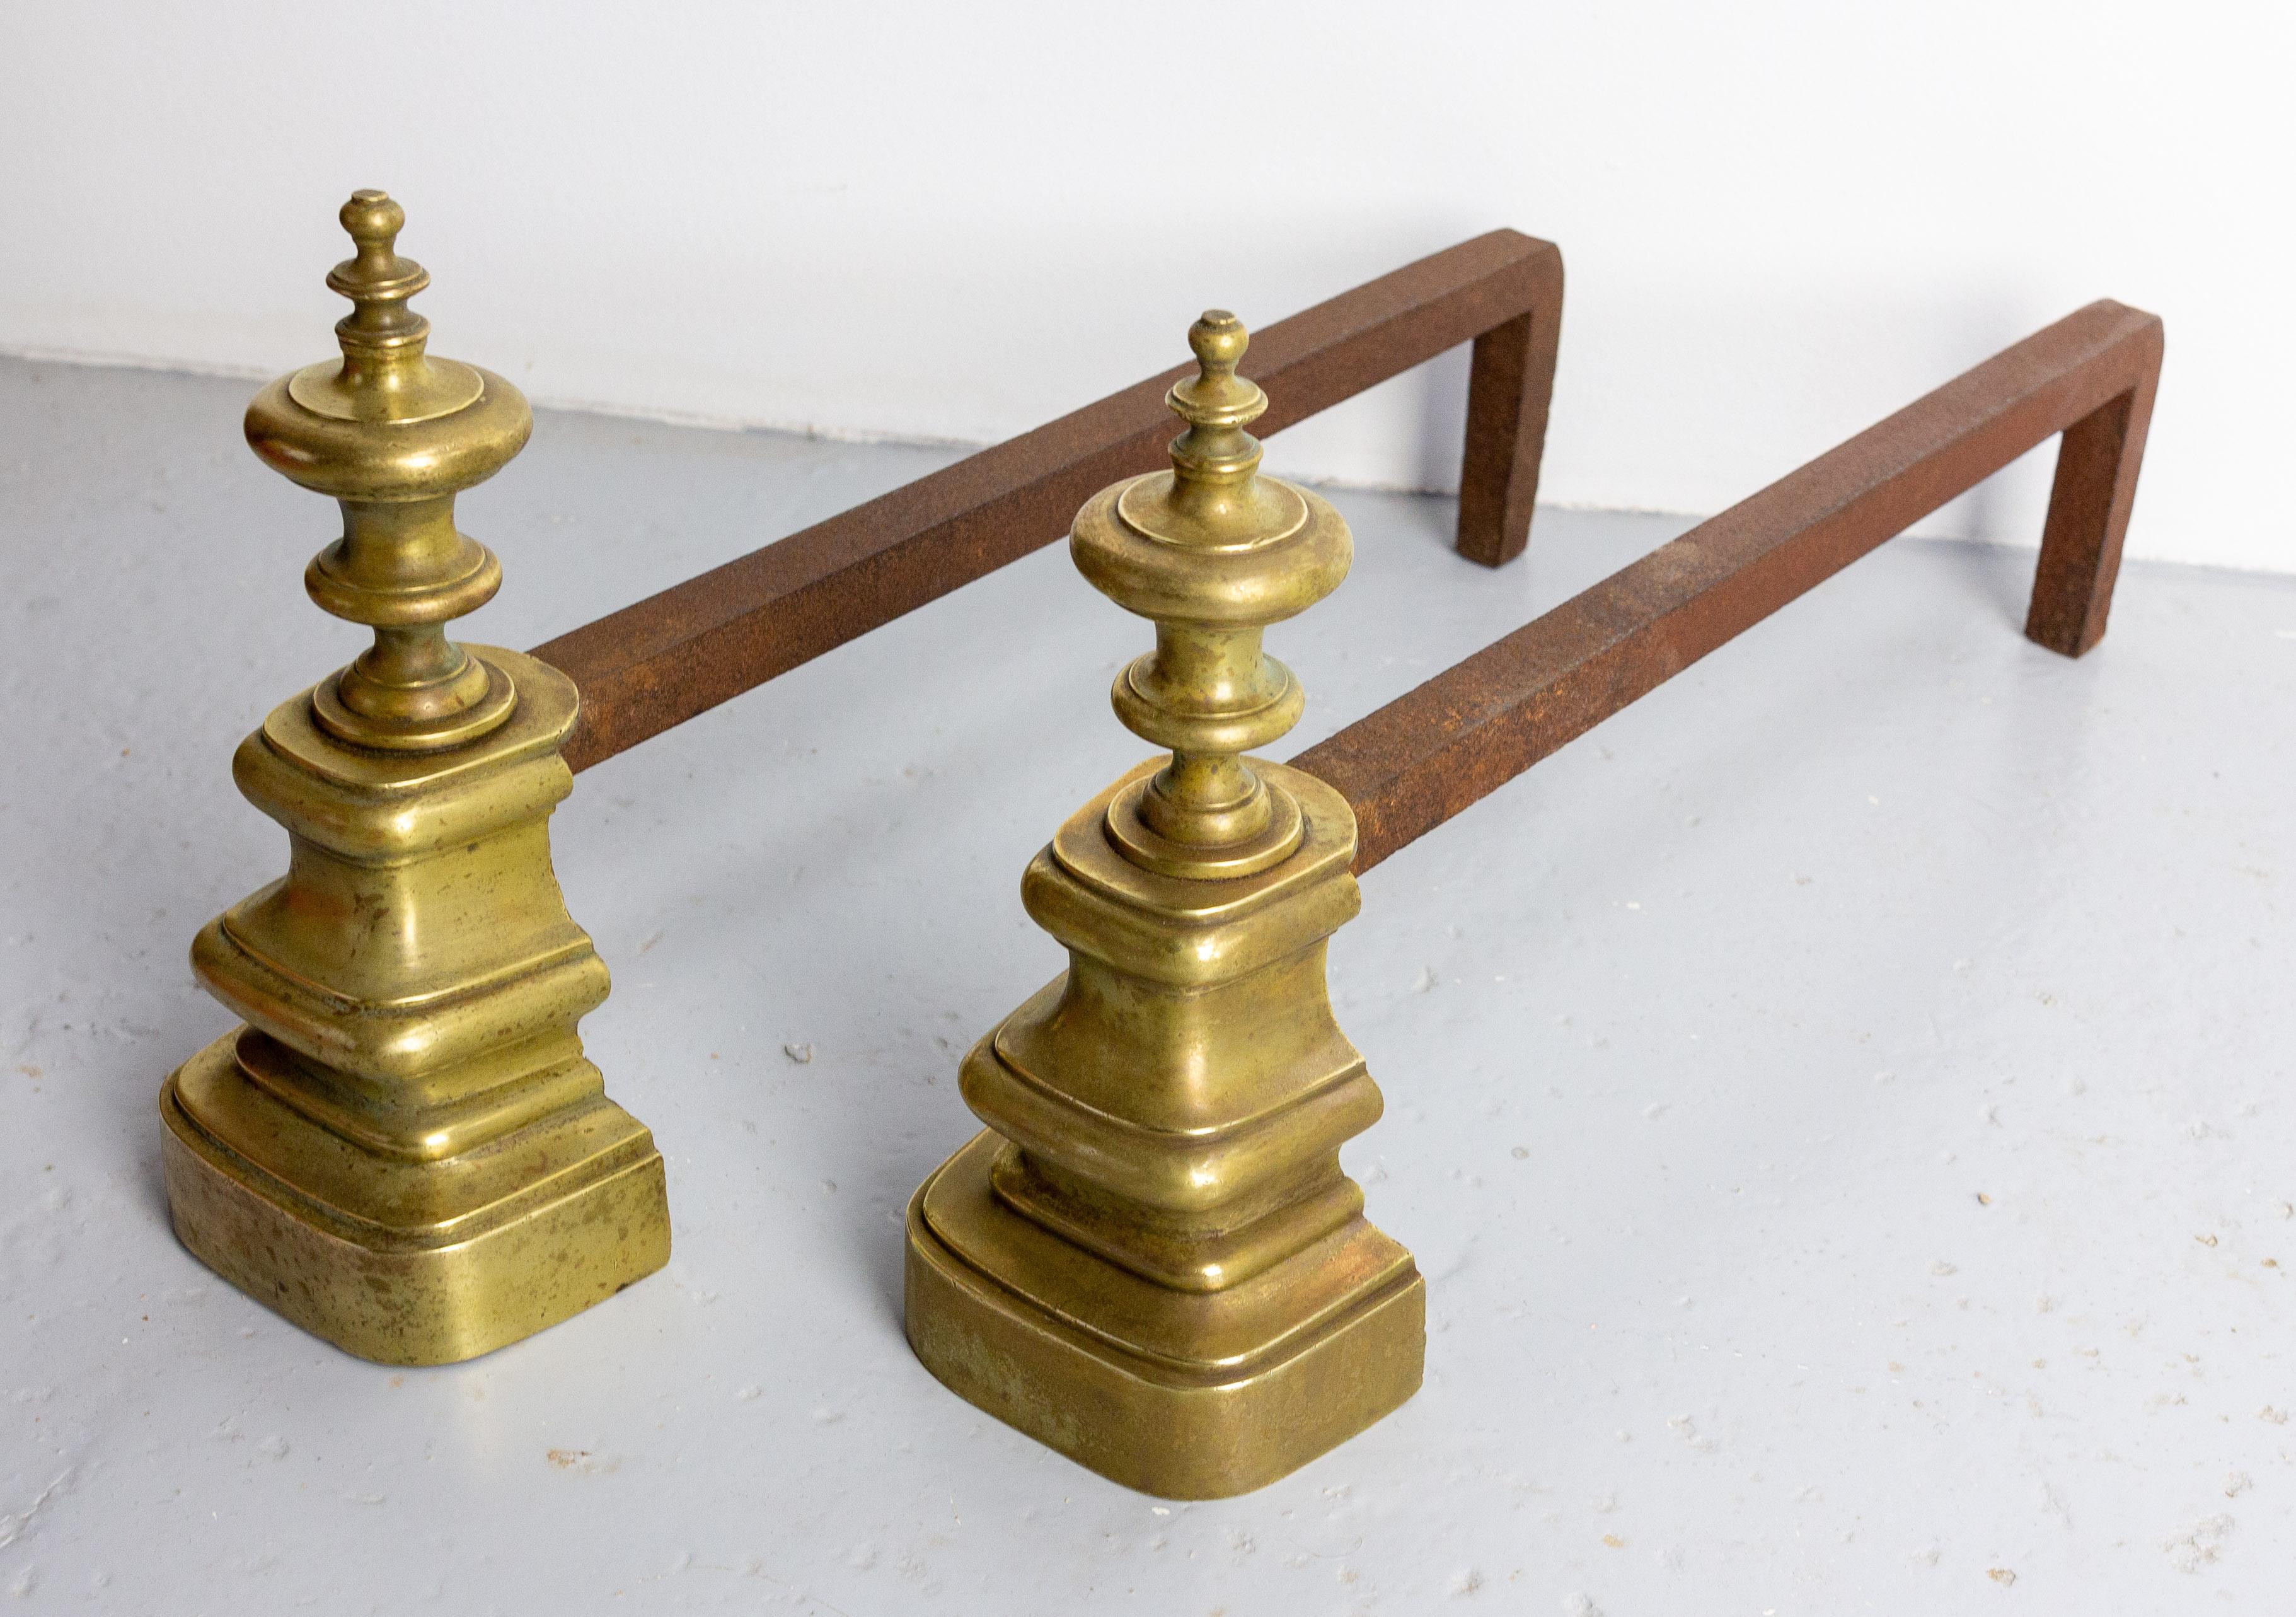 Napoleon III Pair of Fireplace Andirons Brass & Wrought Iron Firedogs, France, circa 1900 For Sale